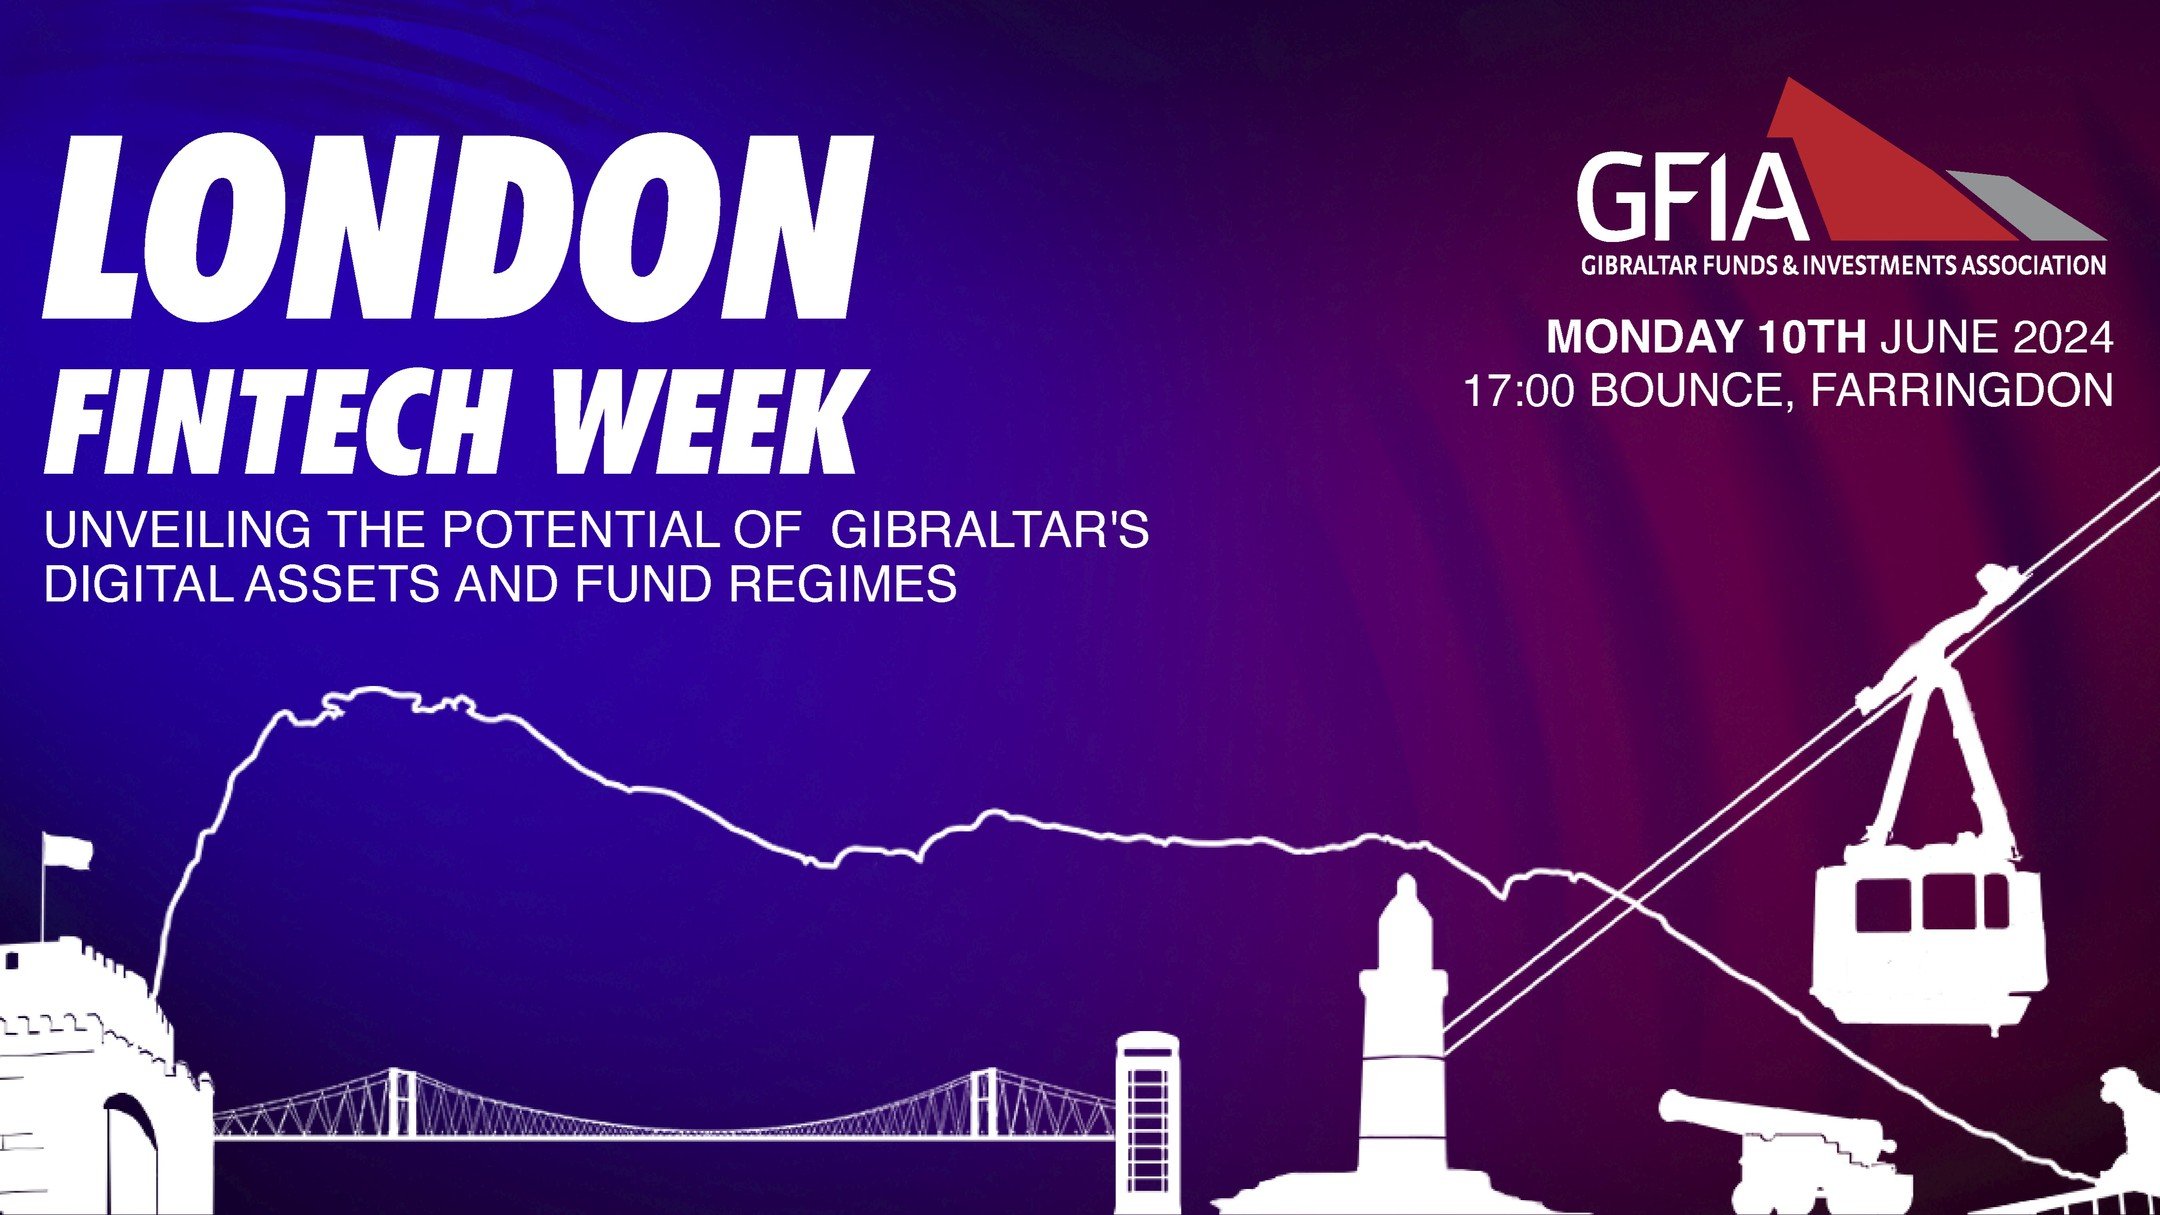 If you're in London for #londonfintechweek and are interested to know more about Gibraltar as a location for funds, come along to @bouncepingpong Farringdon on Monday June 10th to hear from, and meet, the Gibraltar Funds &amp; Investments Association